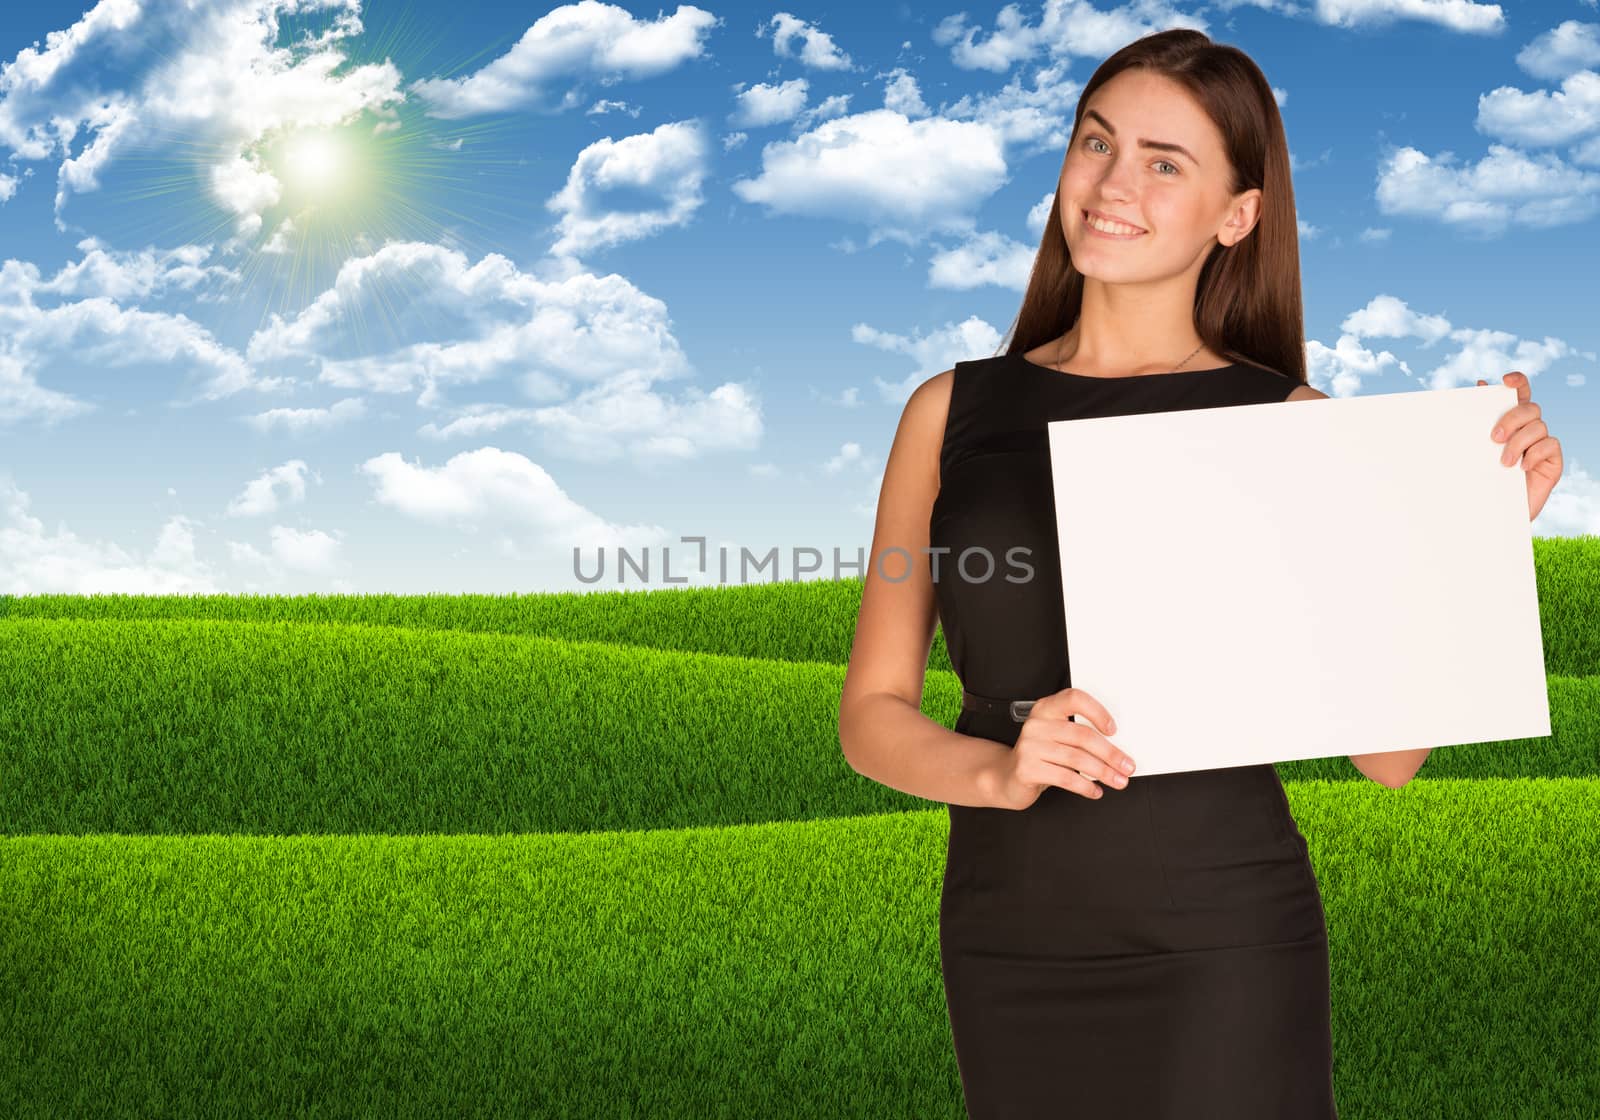 Businesswoman holding paper sheet. Blue sky and green grass as backdrop